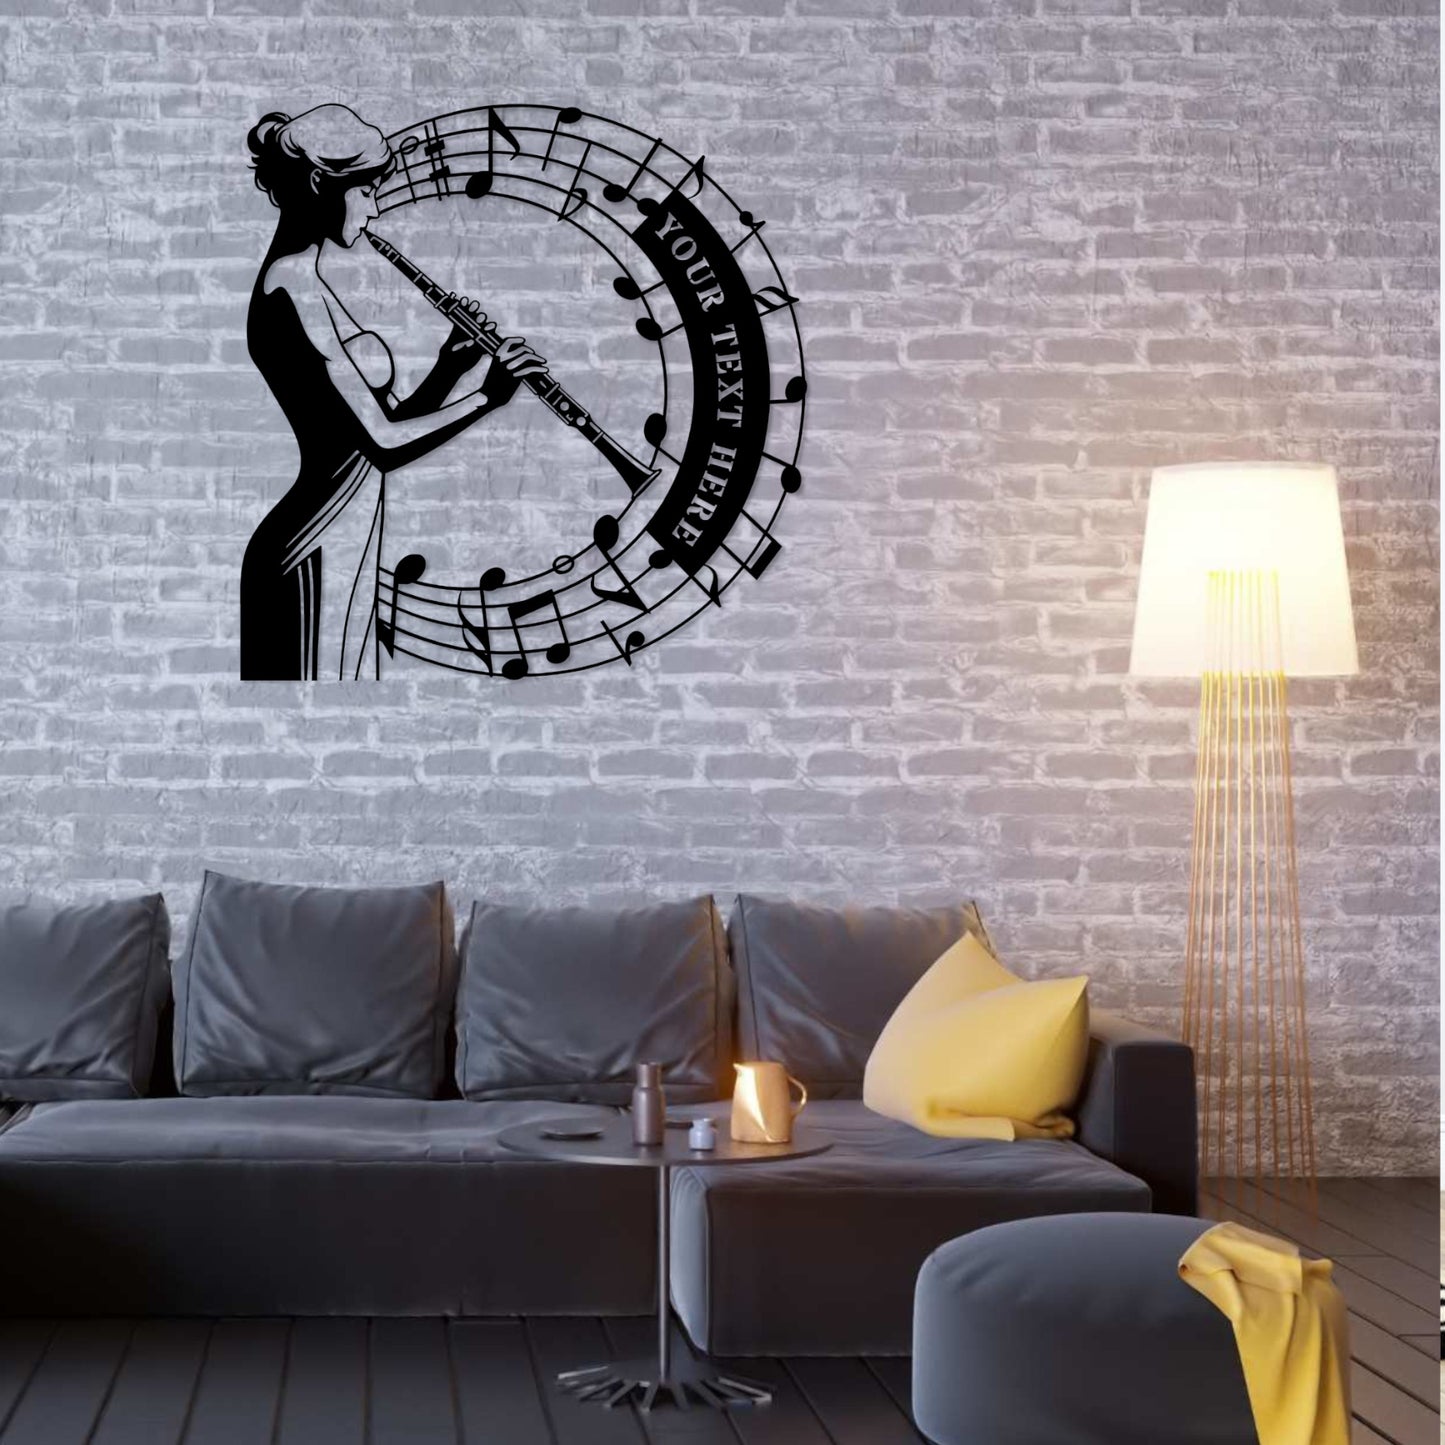 Personalized Female Clarinet Player Name Metal Sign. Custom Musician Wall Decor Gift. Female Jazz Player Wall Hanging. Music Room Decor Gift